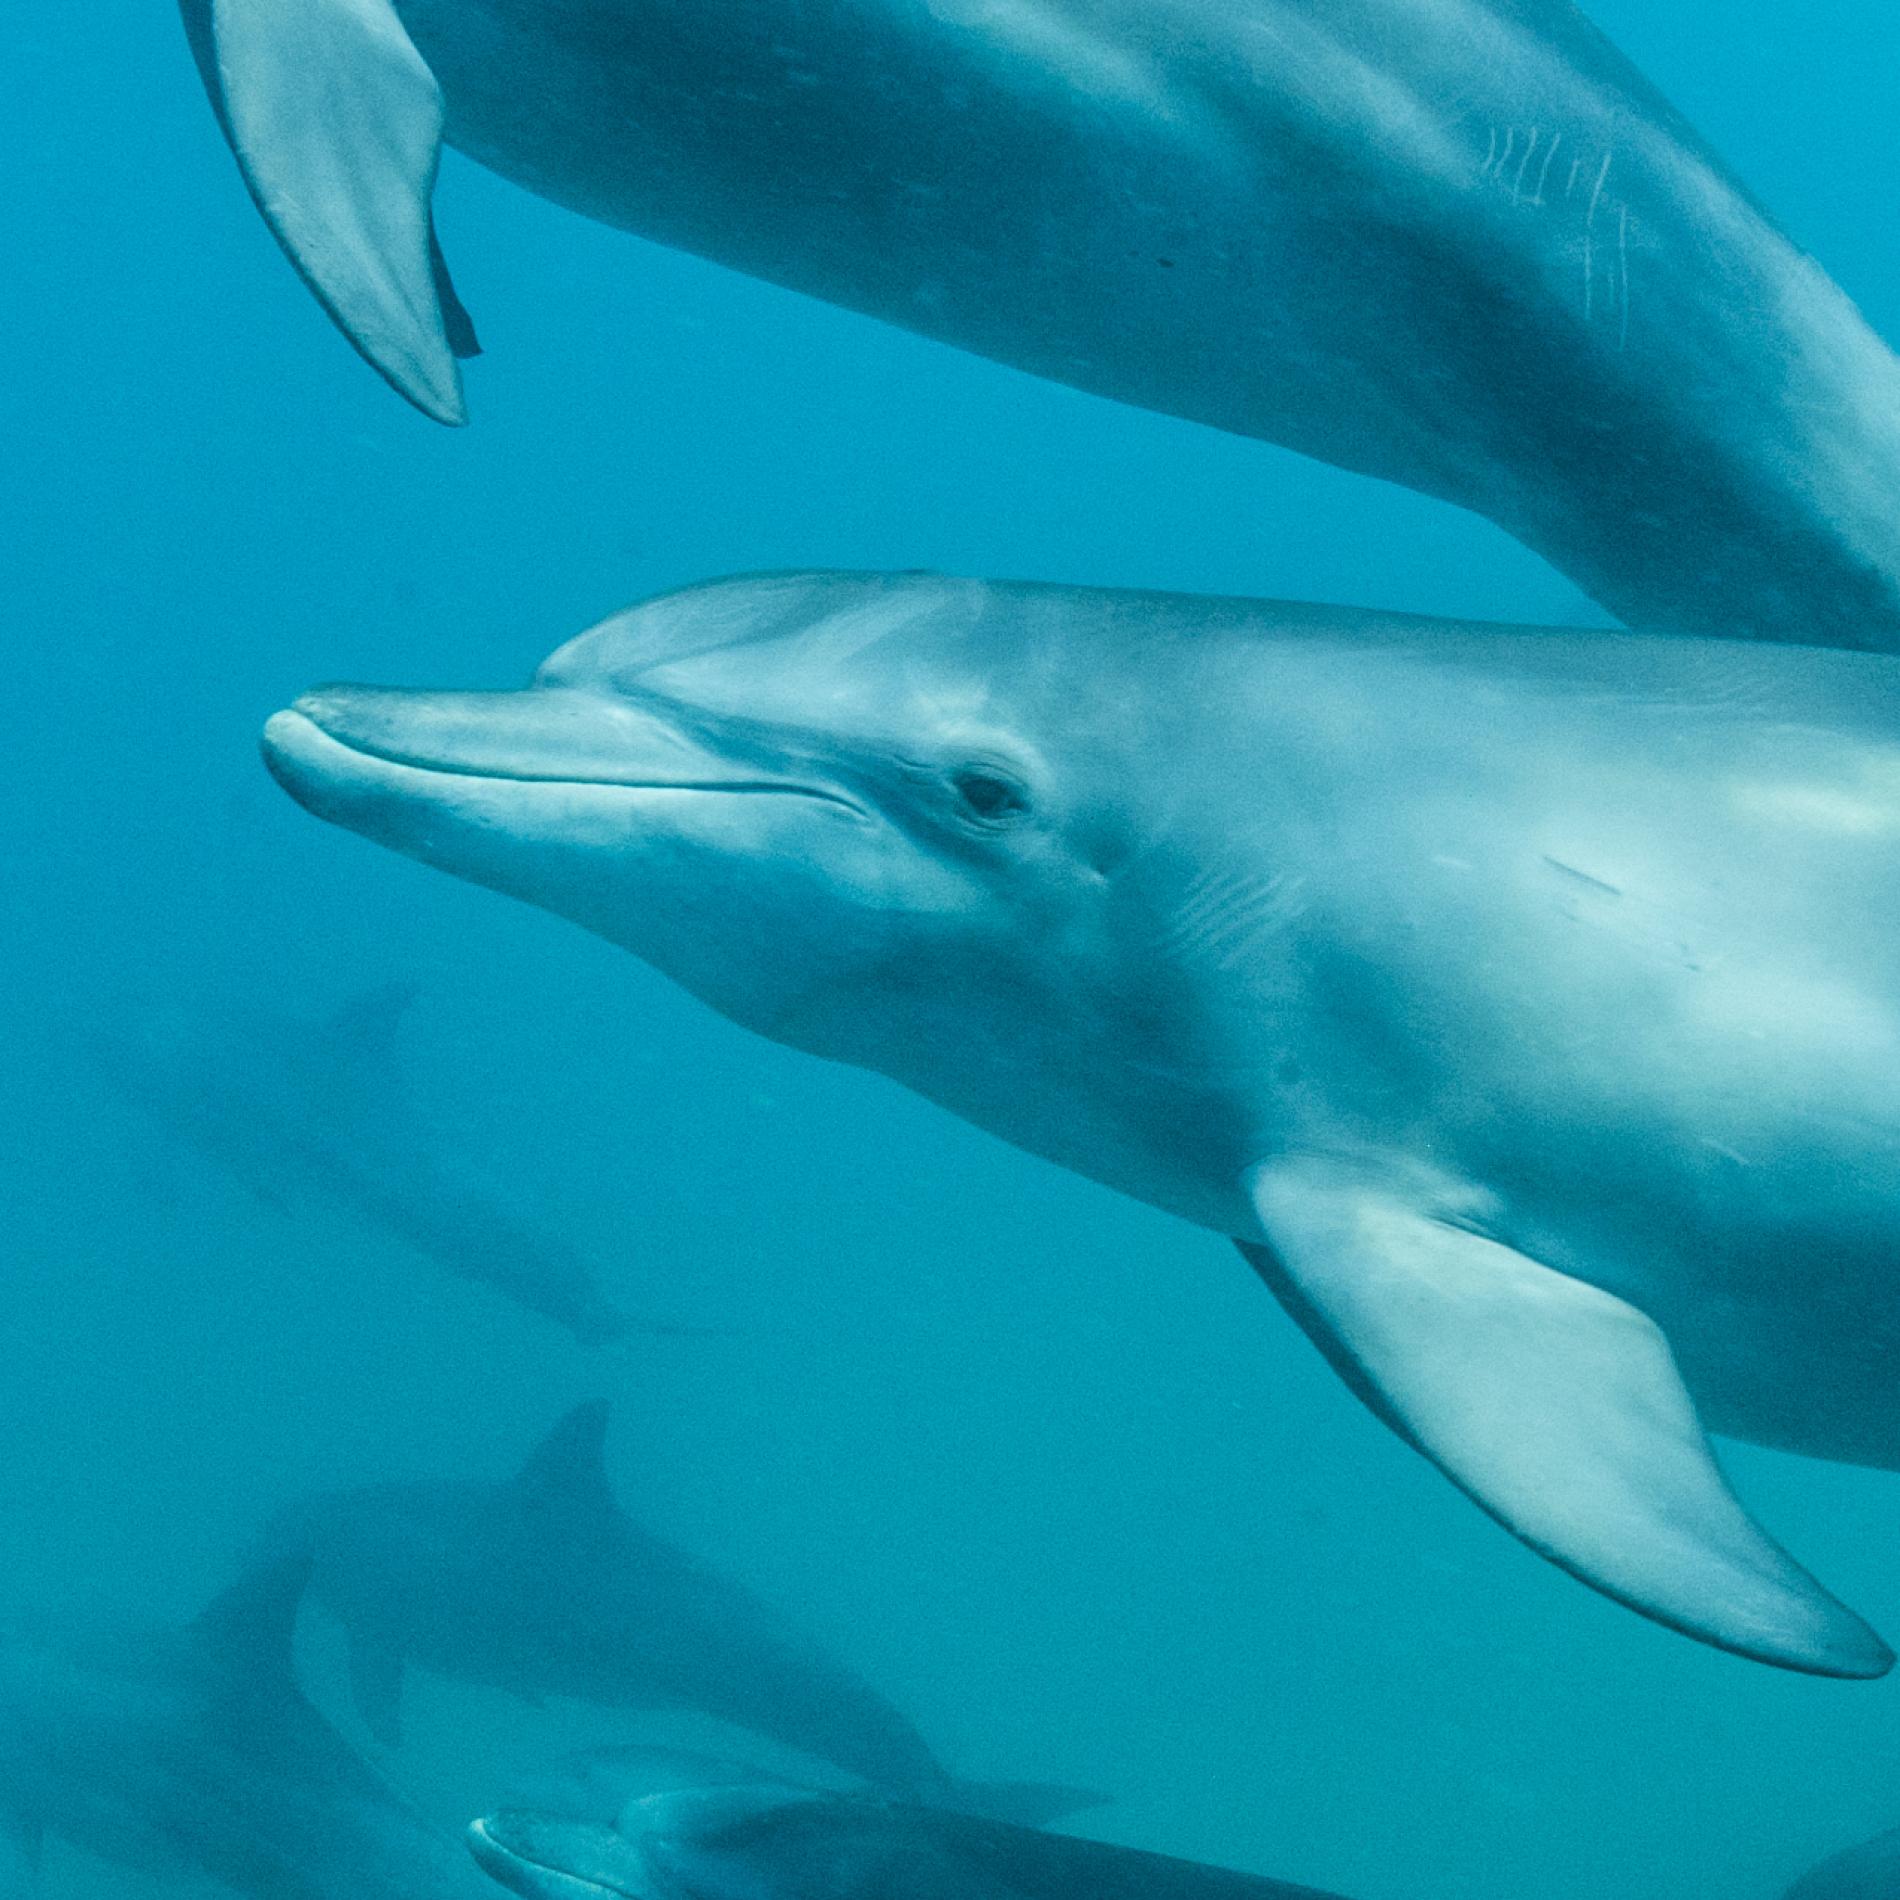 Bottlenose Dolphin | National Geographic